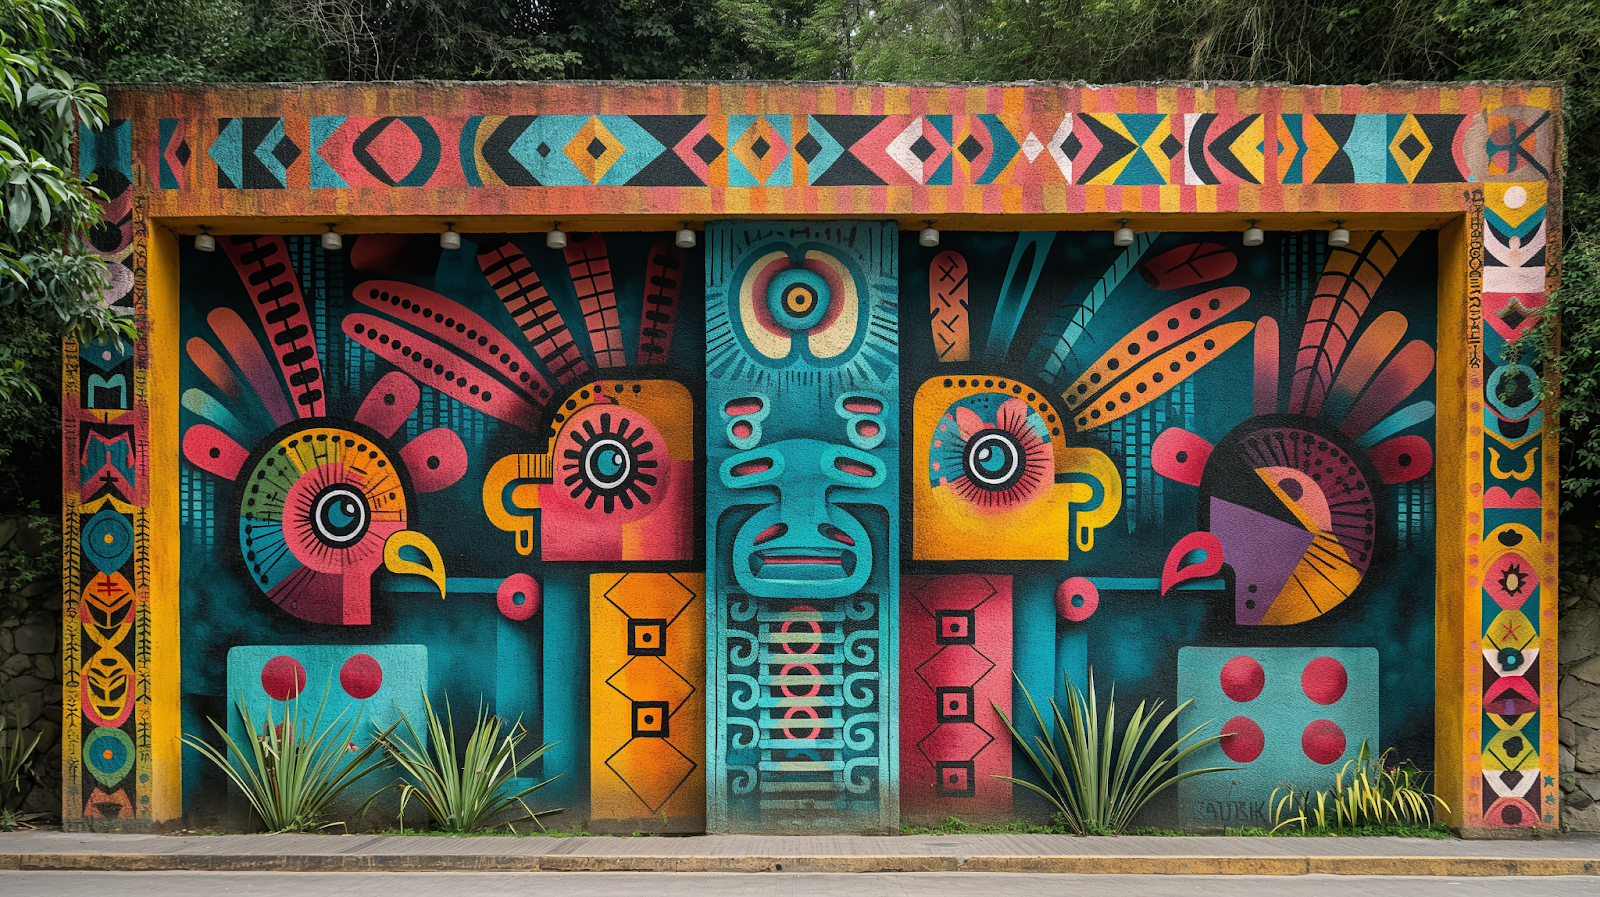 Colorful street mural in Mexico City showcasing Aztec mythology and cultural symbols.